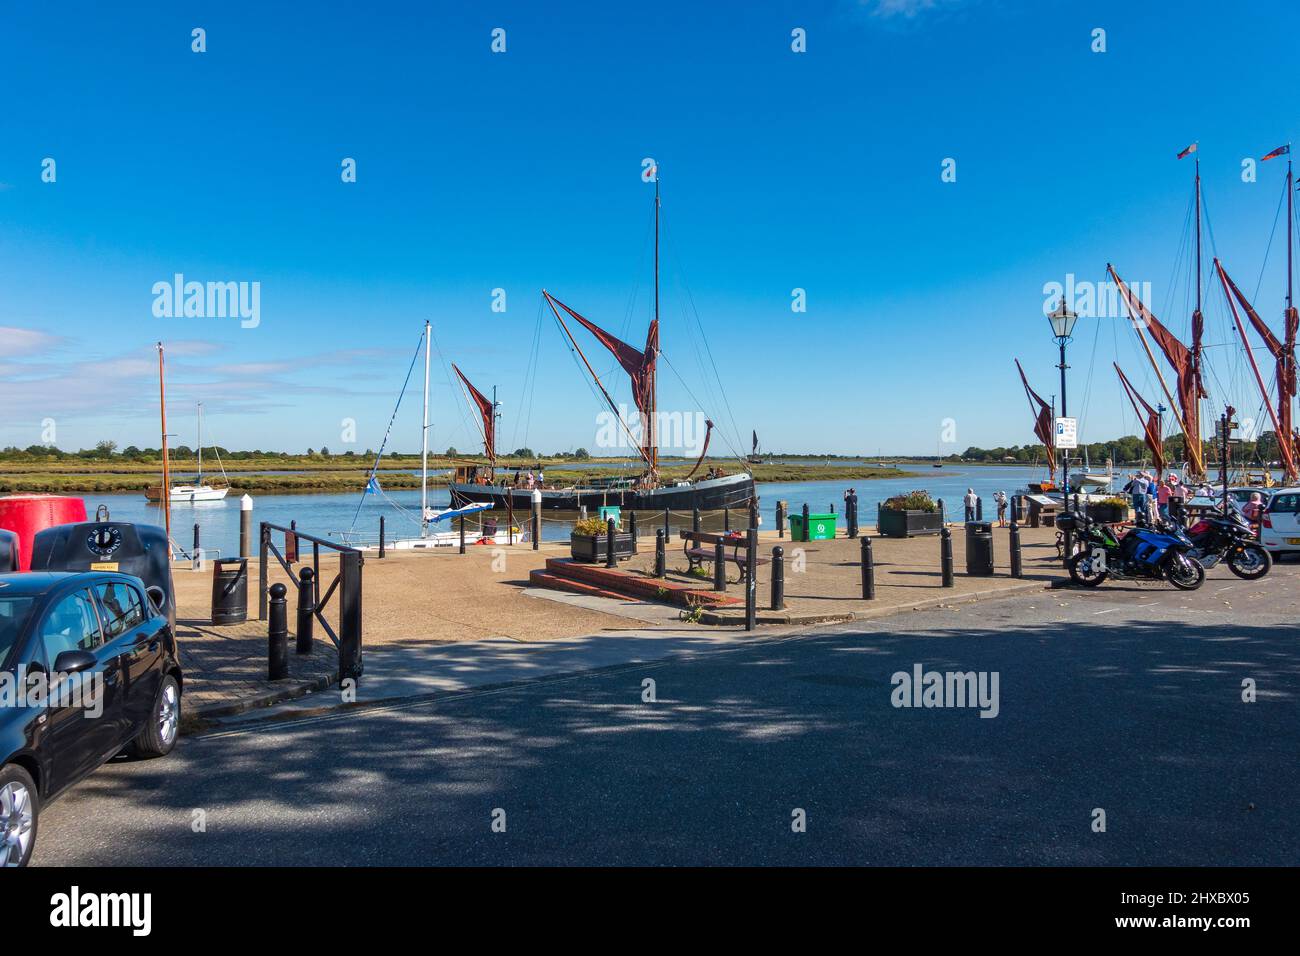 Views of the busy Hythe on the River Chelmer in Maldon, Essex,UK Stock Photo